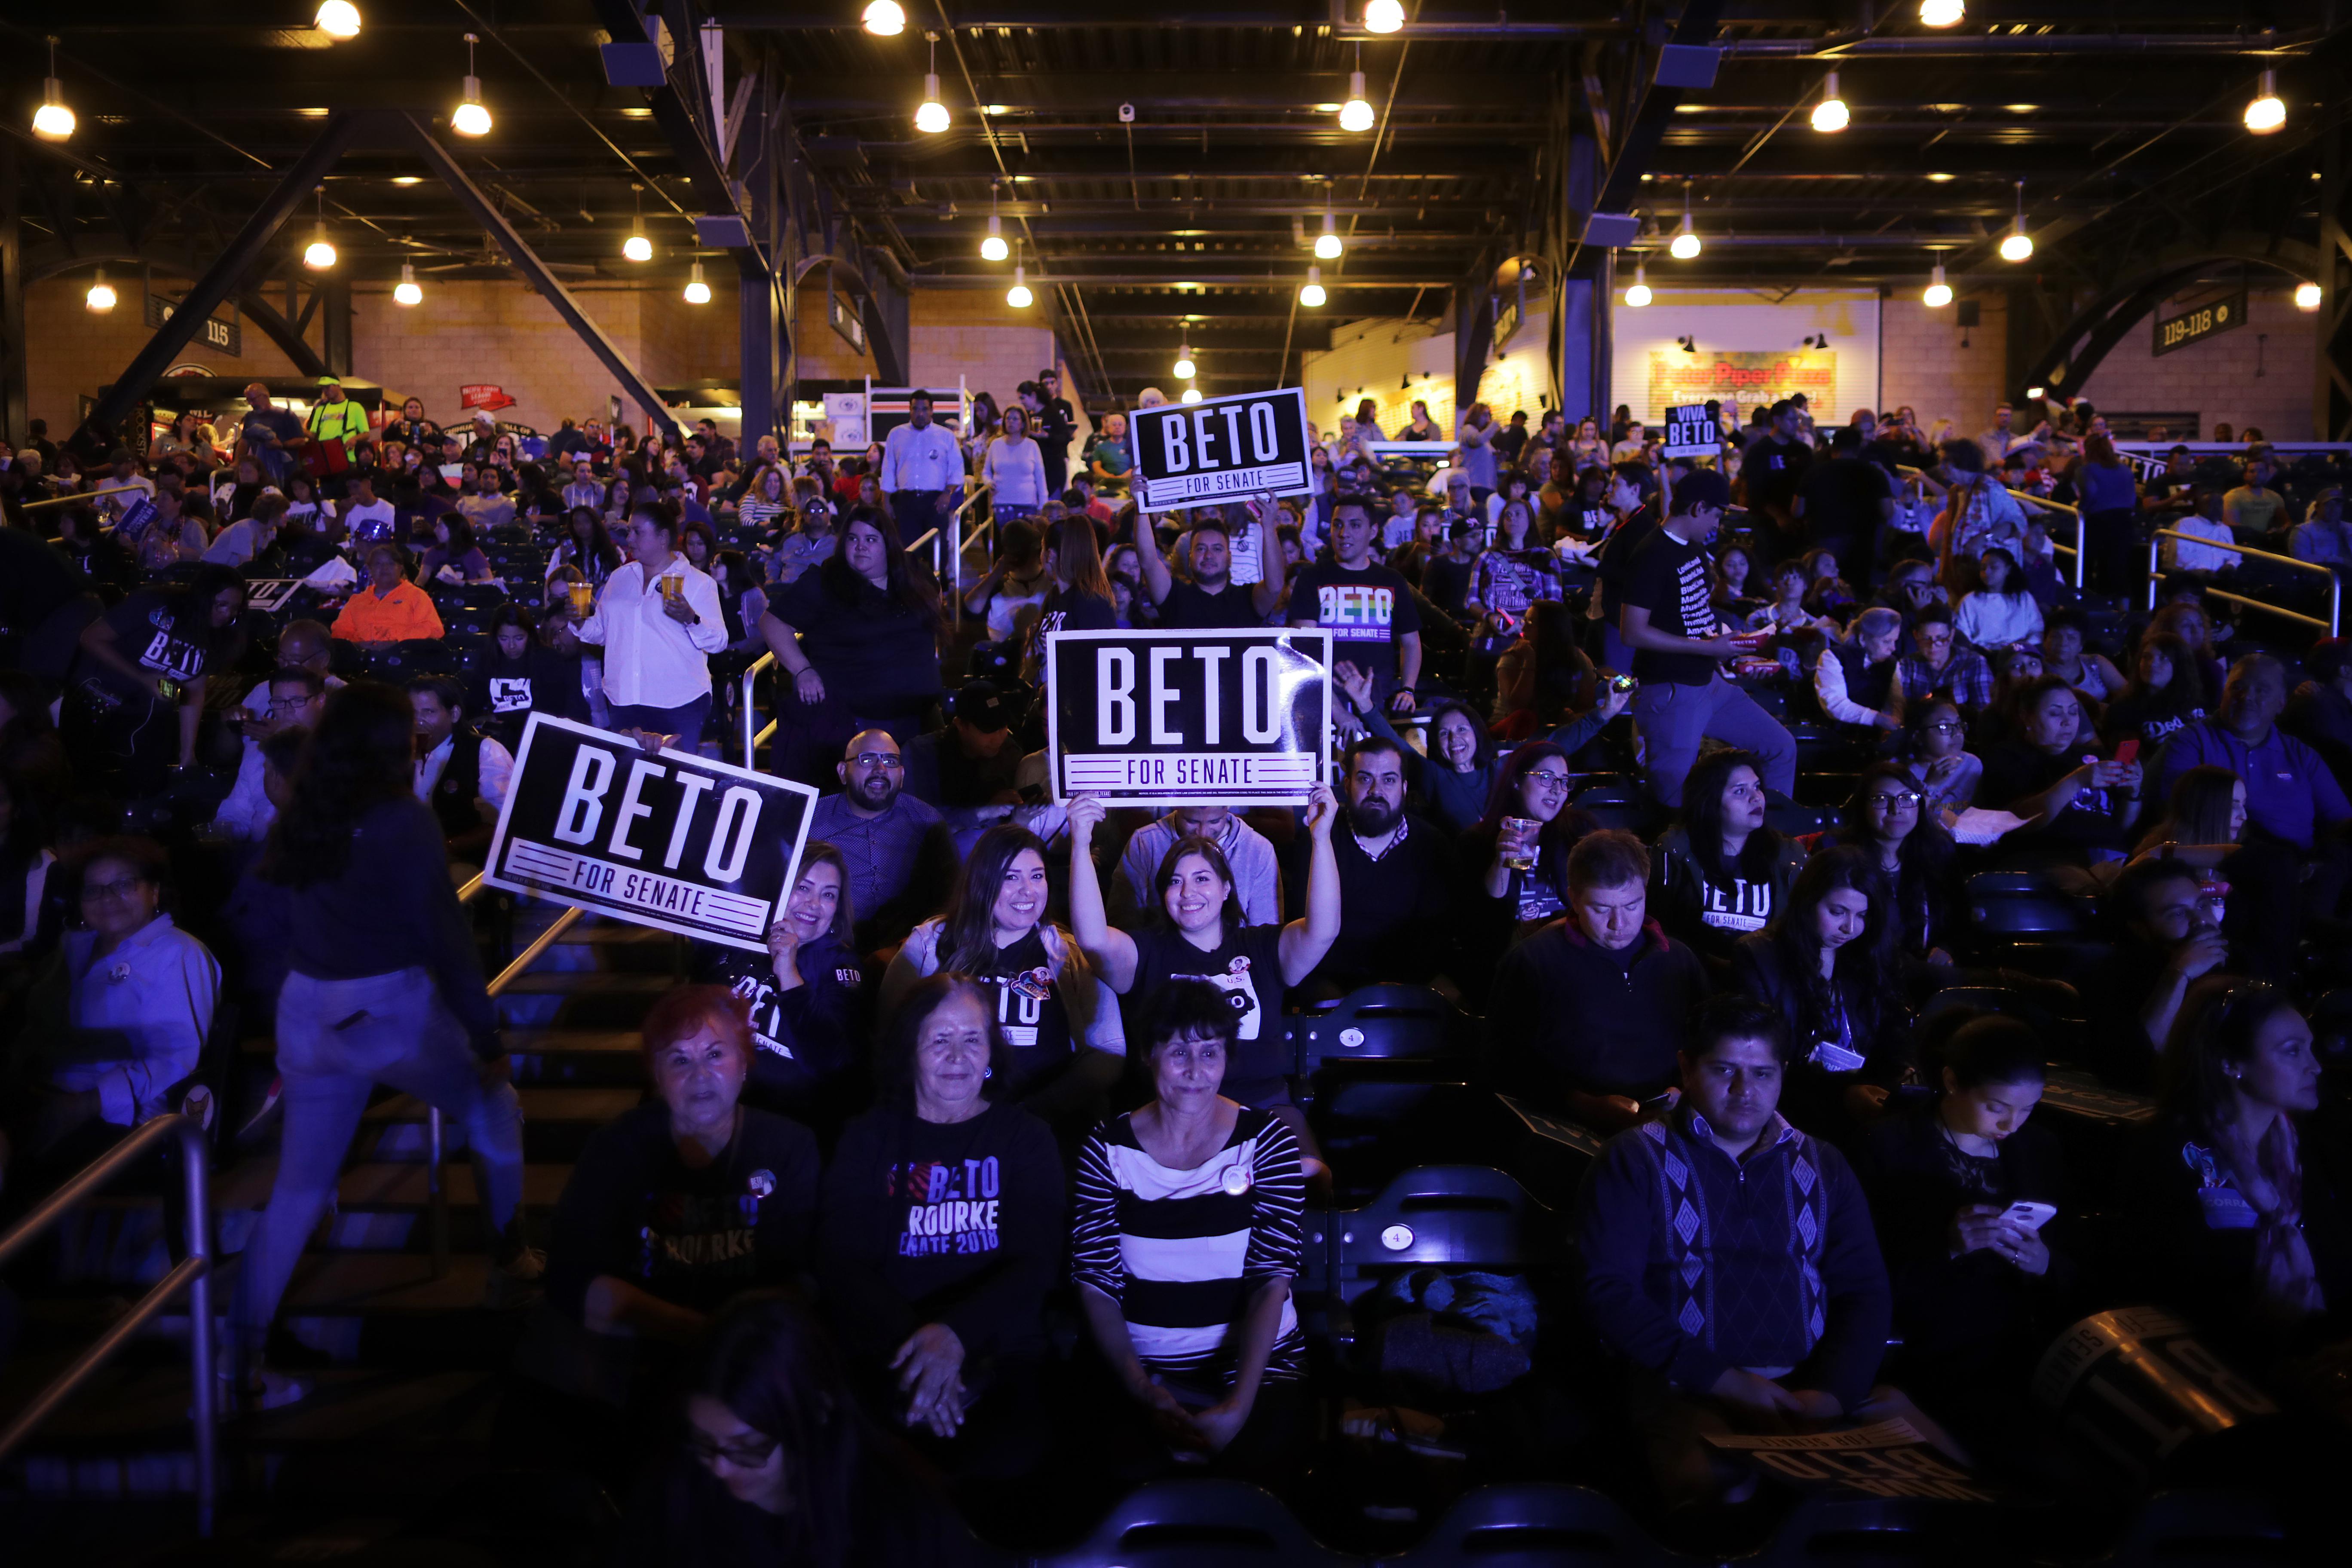 Thousands of supporters attend an election night party for U.S. Senate candidate Rep. Beto O'Rourke, who lost to Ted Cruz. 